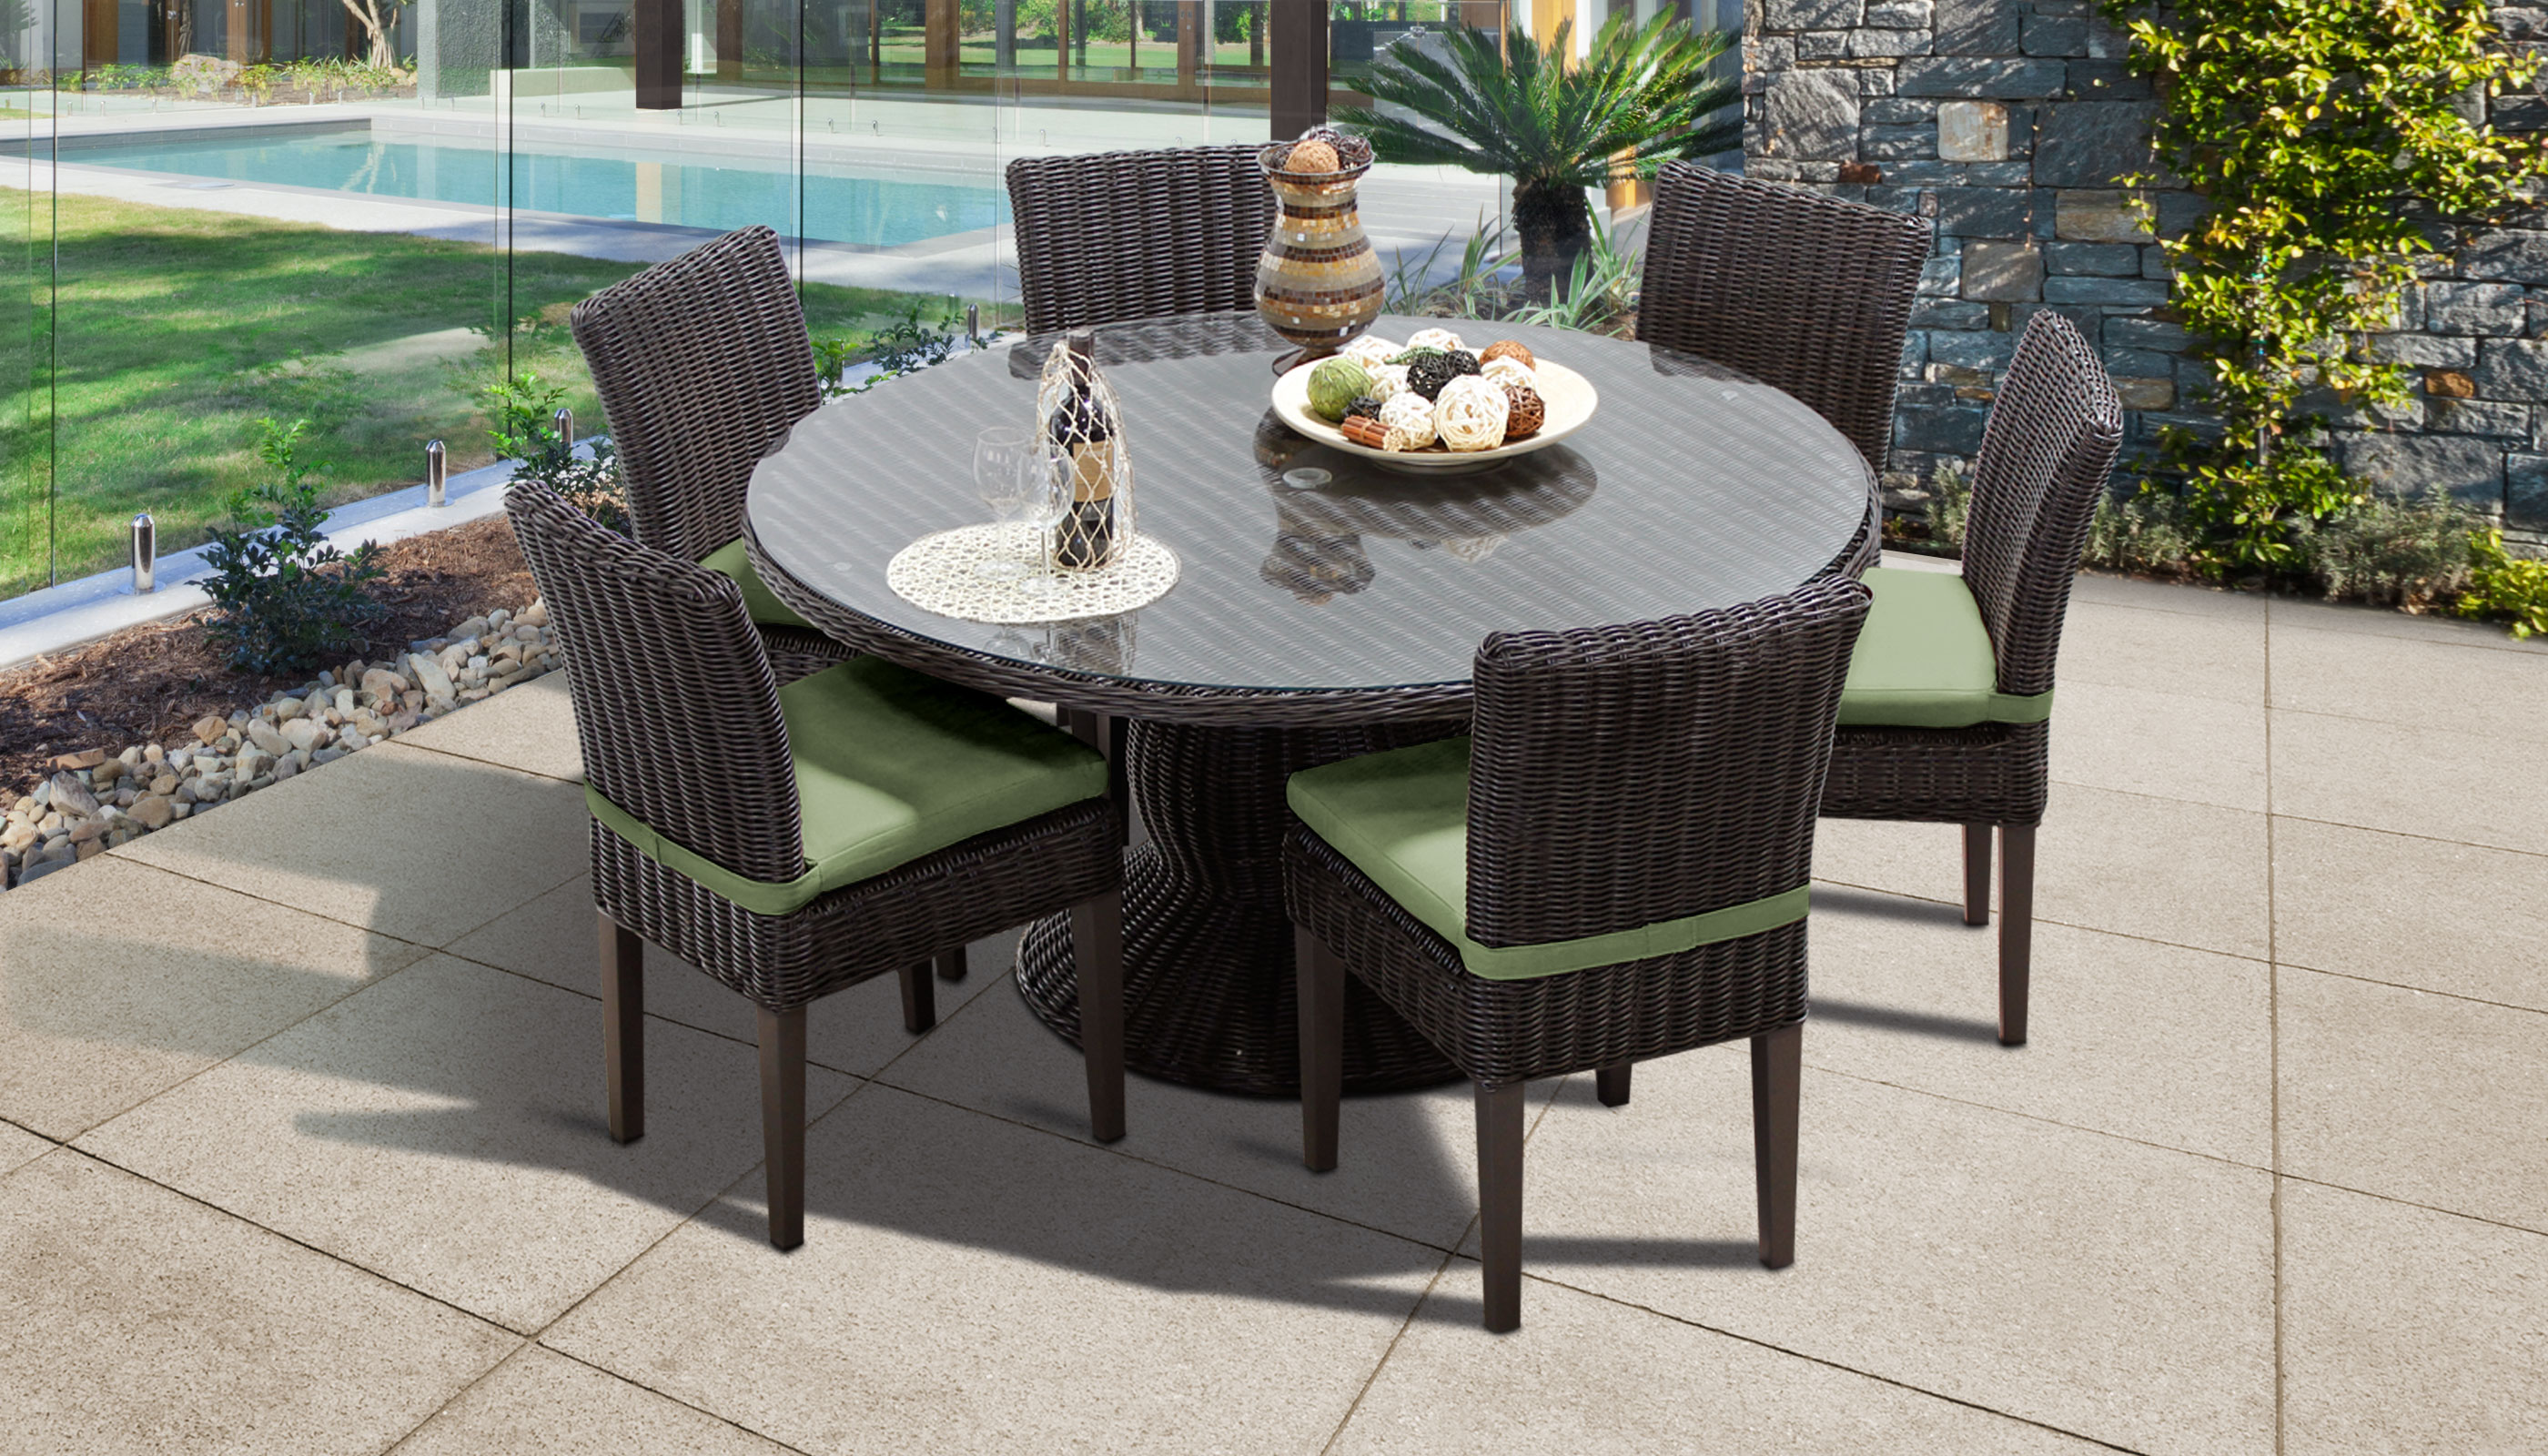 Round Outdoor Dining Table Seats 6 | Outdoor Dining